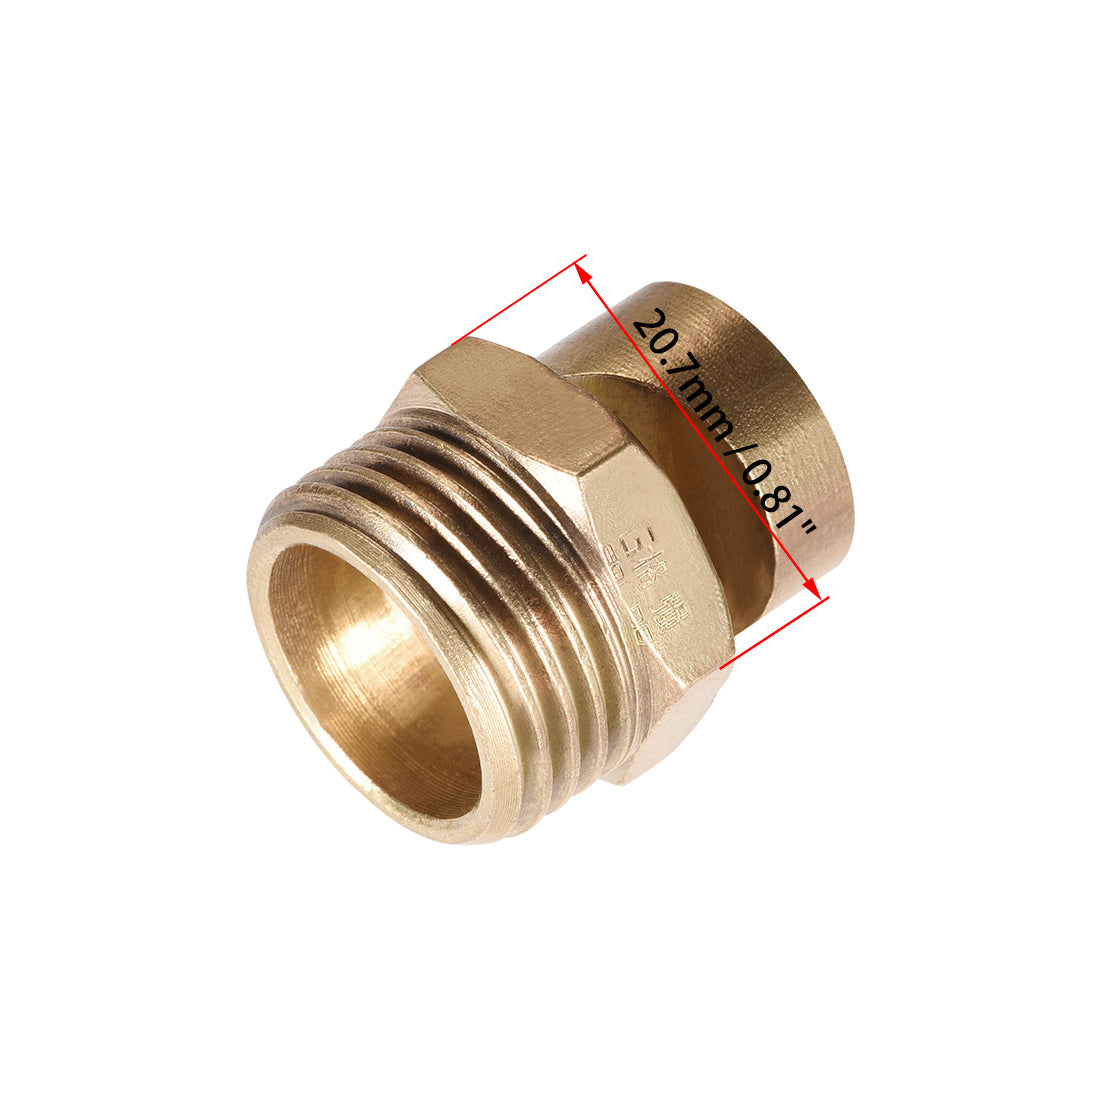 uxcell Uxcell Floodjet  Tip - 1/2BSPT Brass 170 Degree Wide Angle Flat Fan Nozzle - 2 Pcs